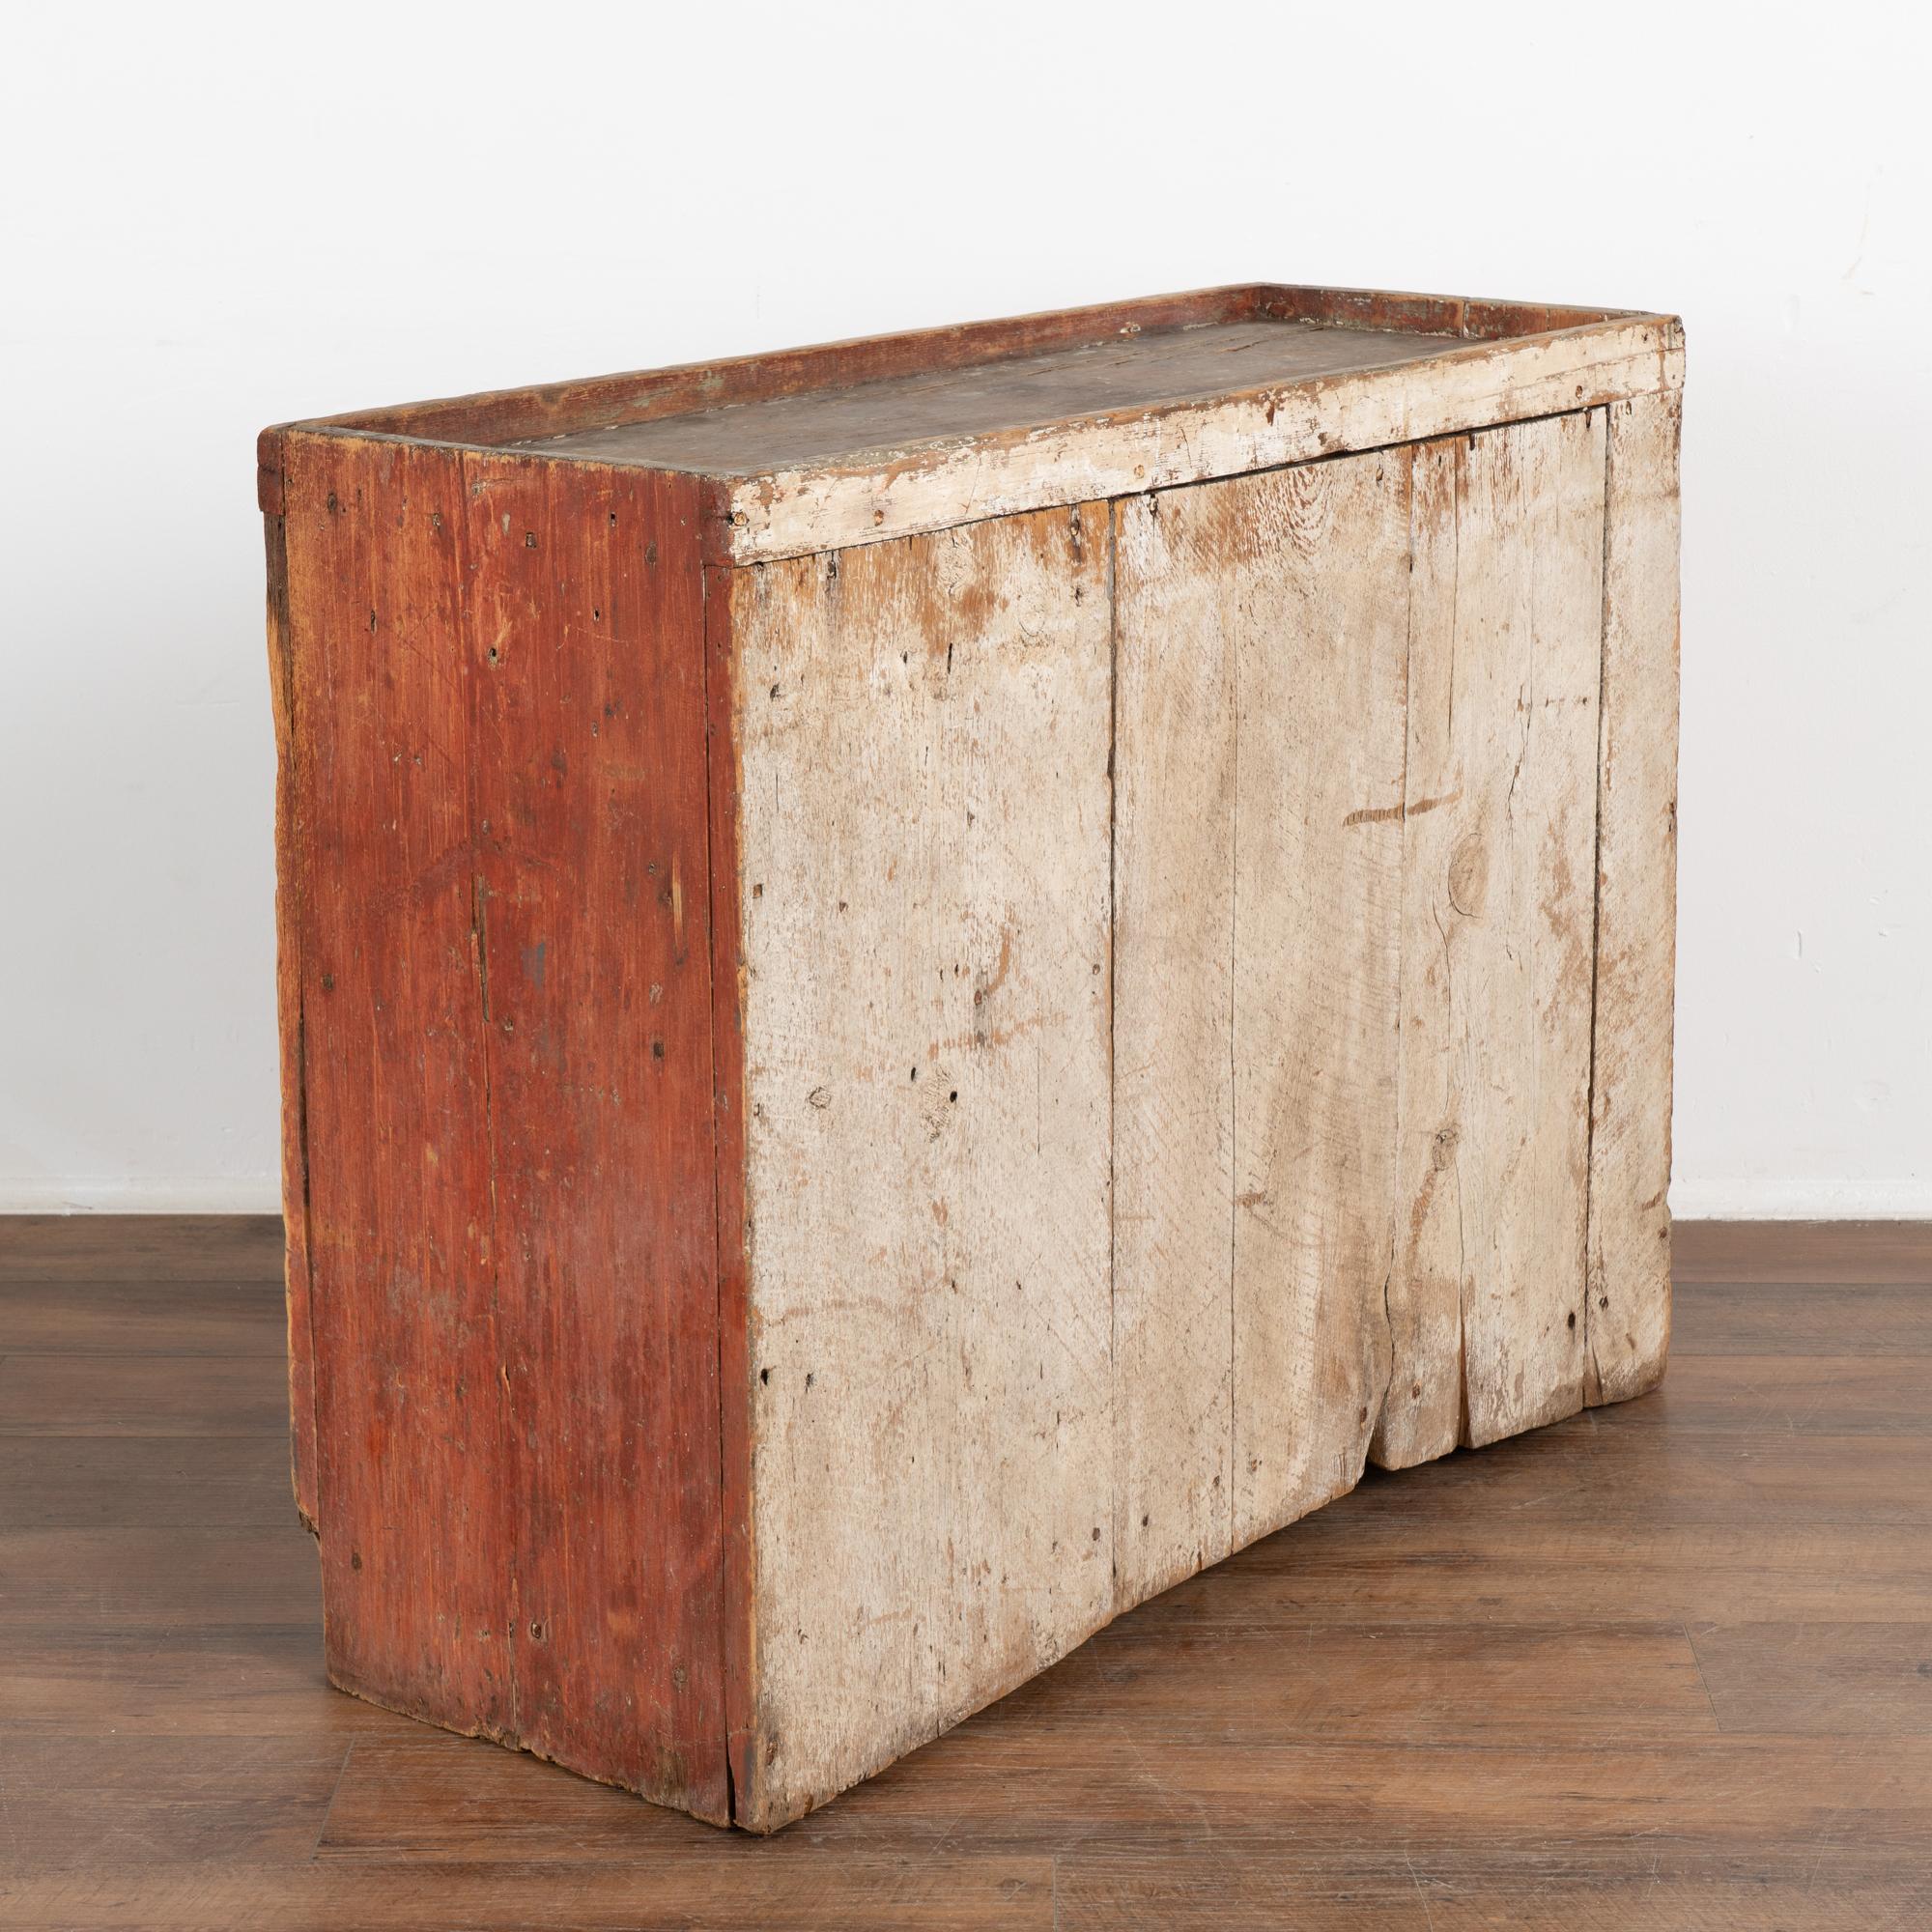 Original Red Painted Rustic Narrow Pine Cabinet, Sweden circa 1840-60 For Sale 5